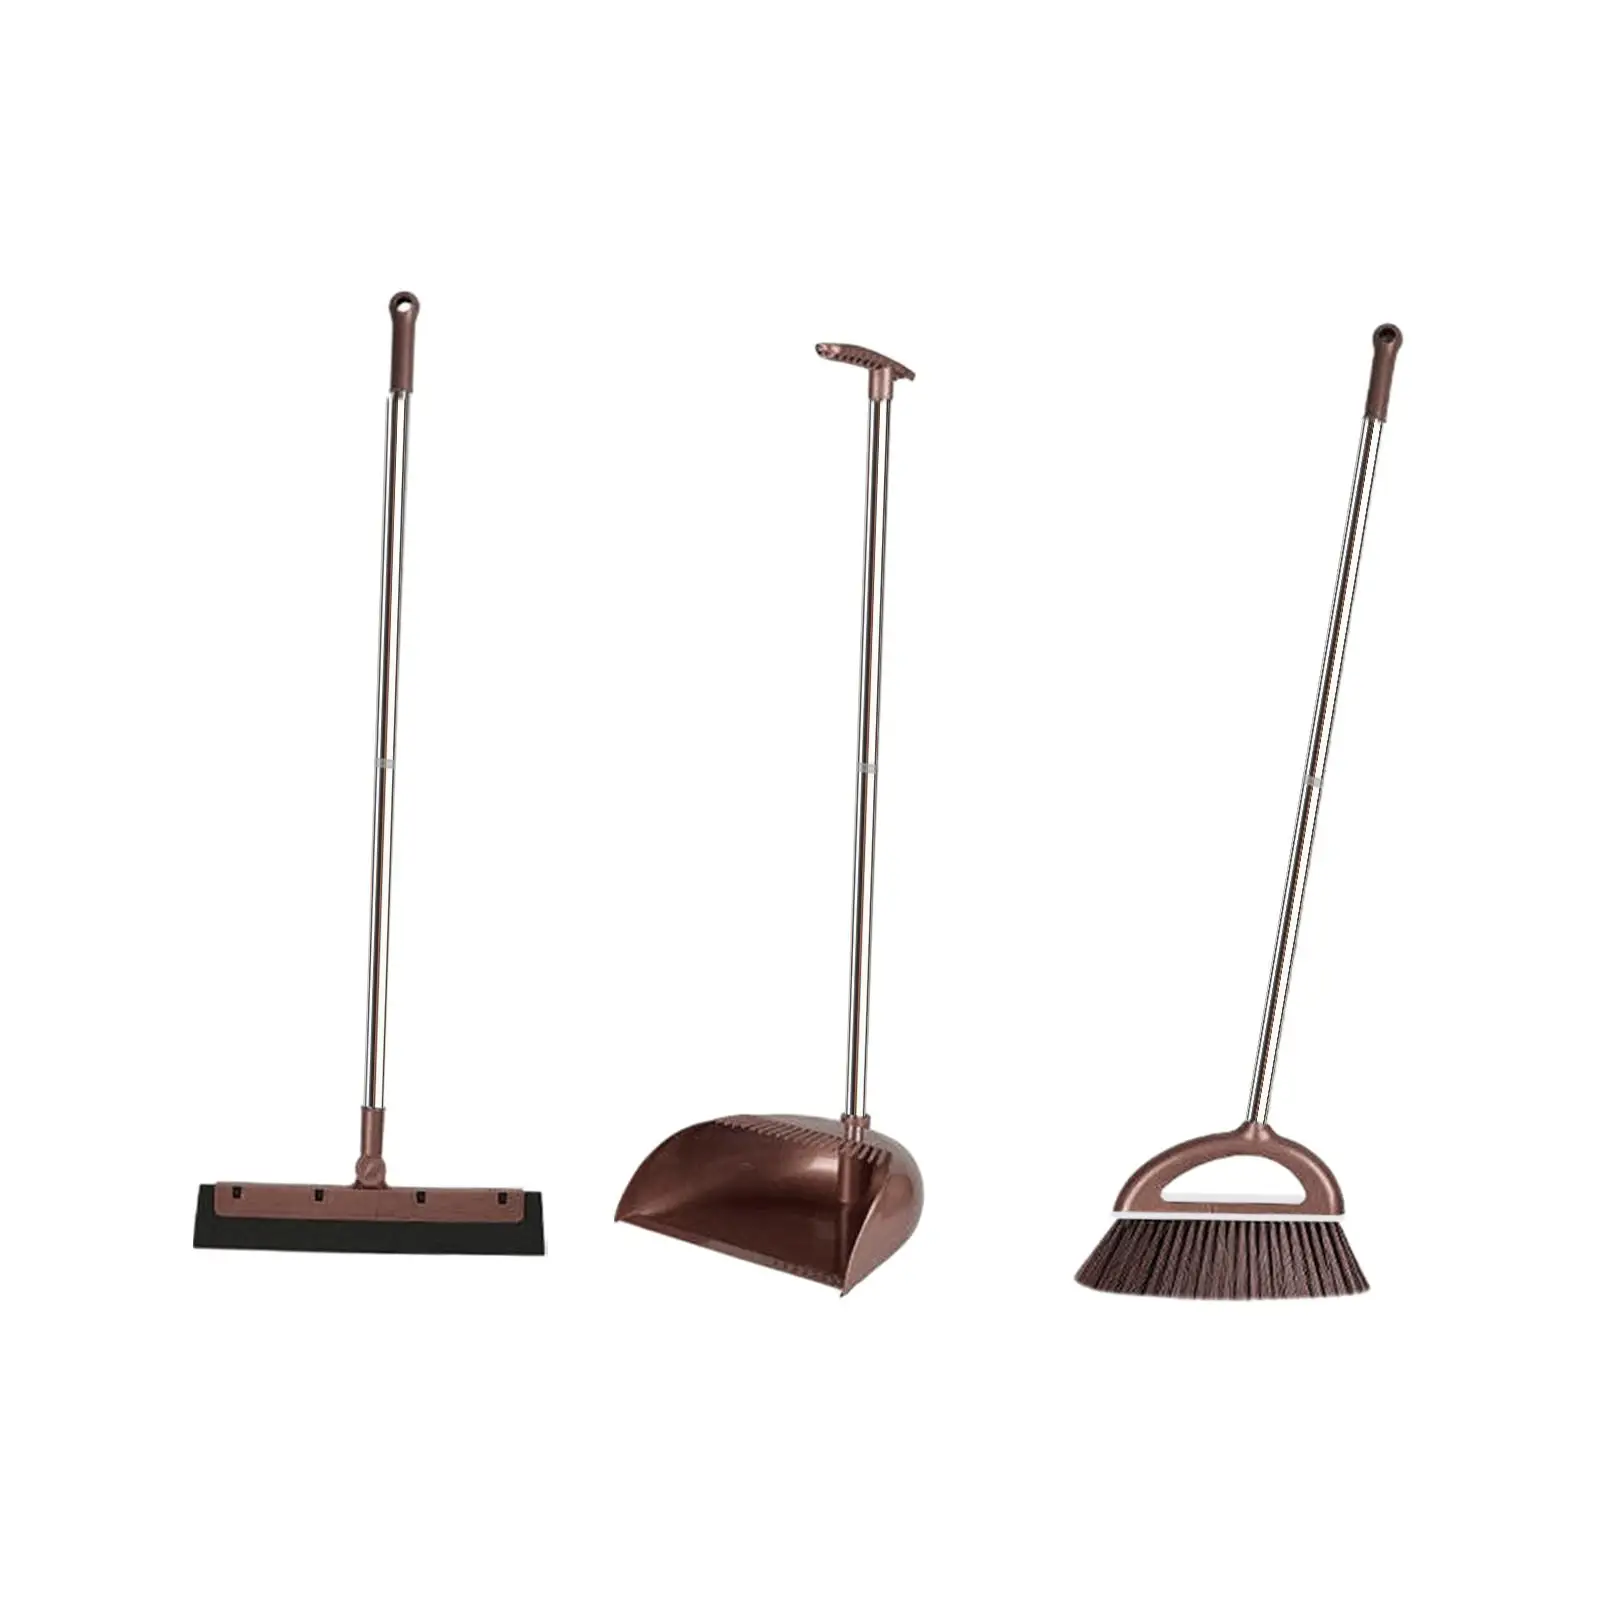 3x Broom and Dustpan Set Floor Wiper Multifunction Soft Hair Hair Sweeping Combo Set for Household Office Lobby Kitchen Cleaning